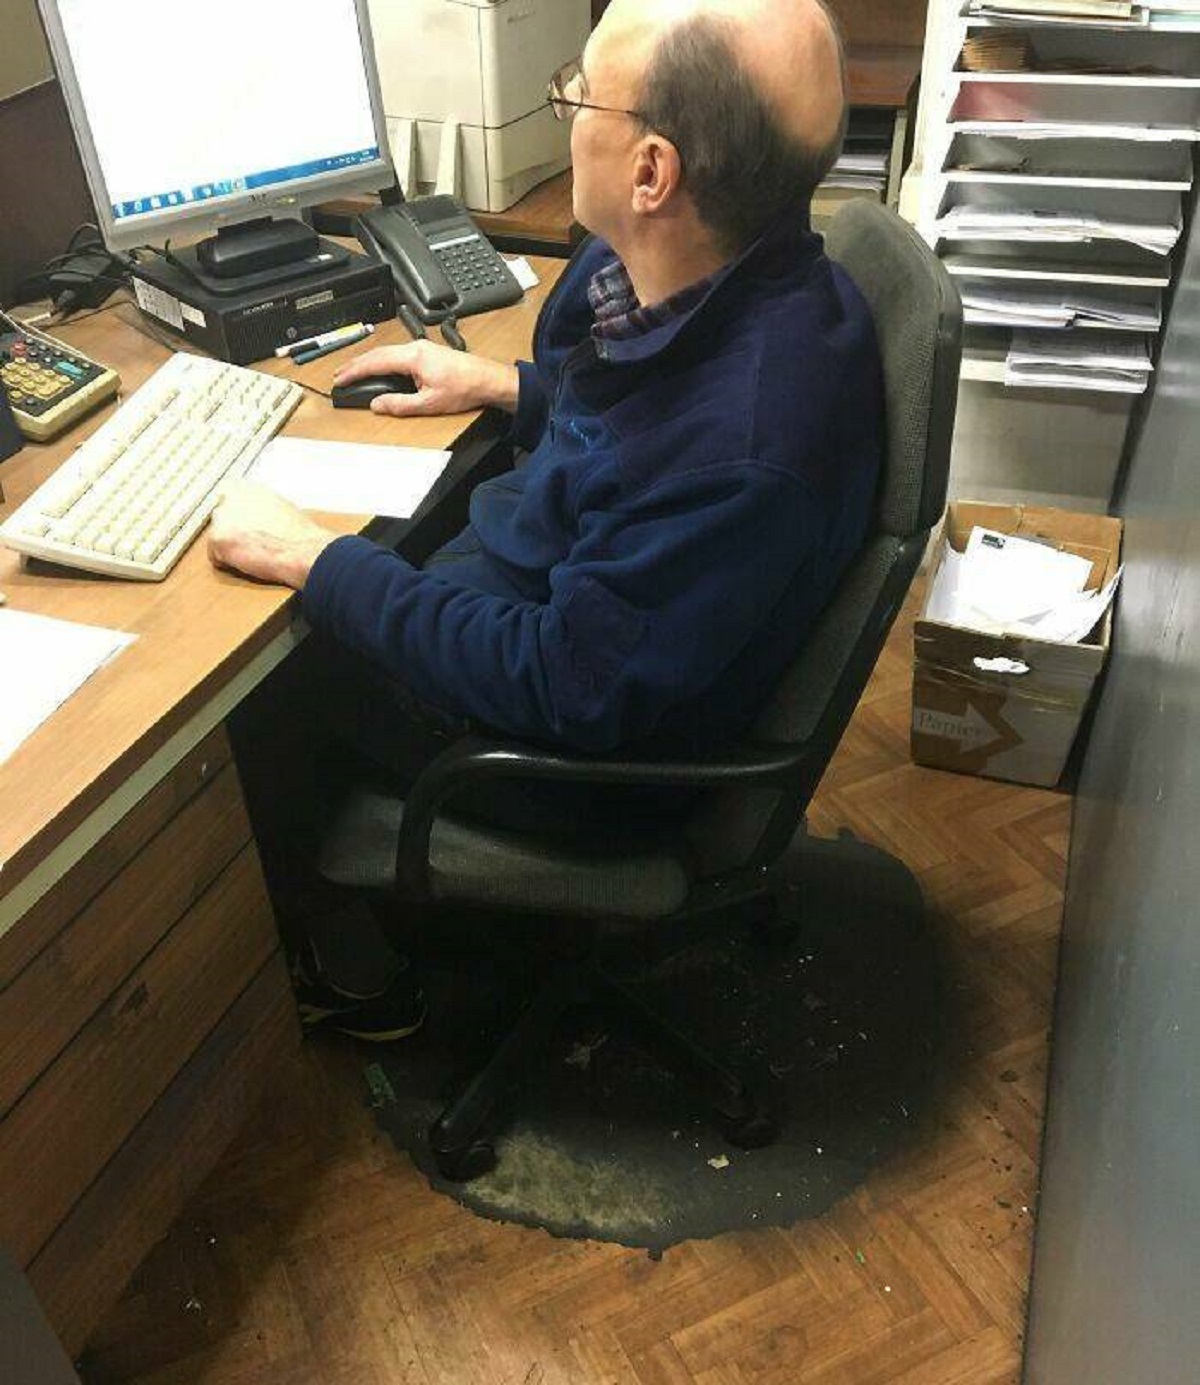 "What Working And Sitting On The Same Spot For 41 Years Does To The Floor"